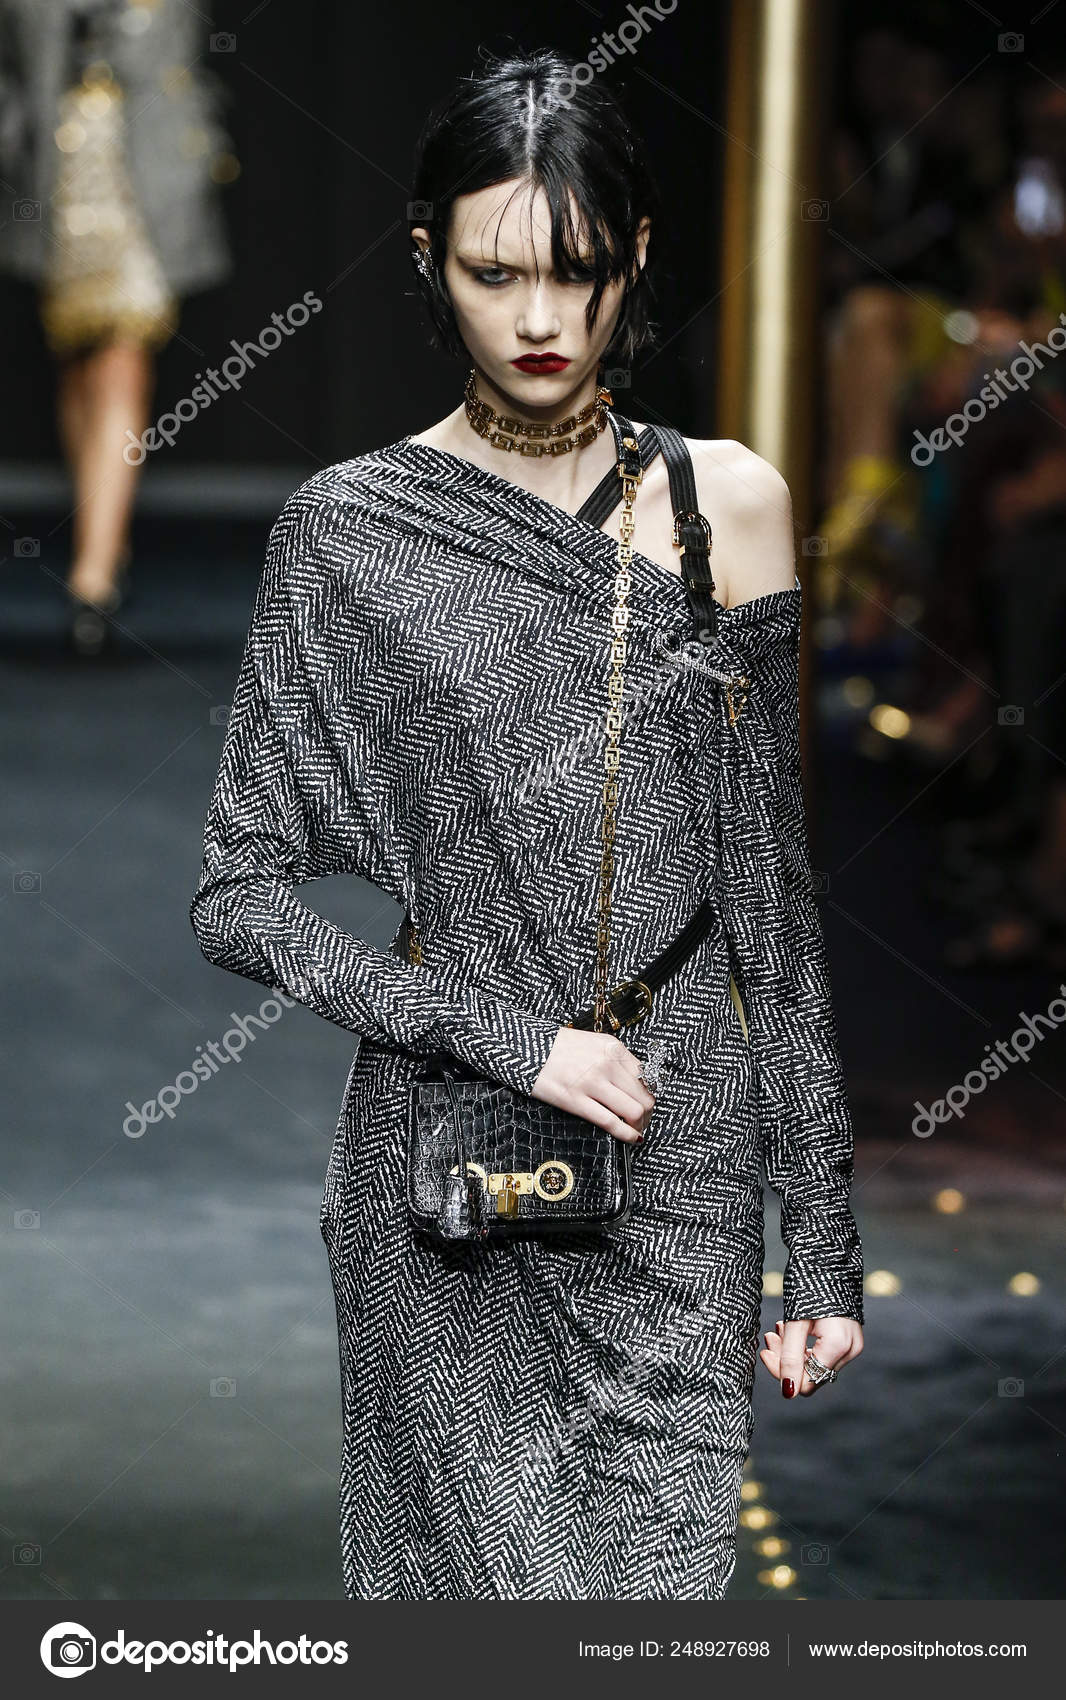 A model walks the runway during the Louis Vuitton Ready to Wear